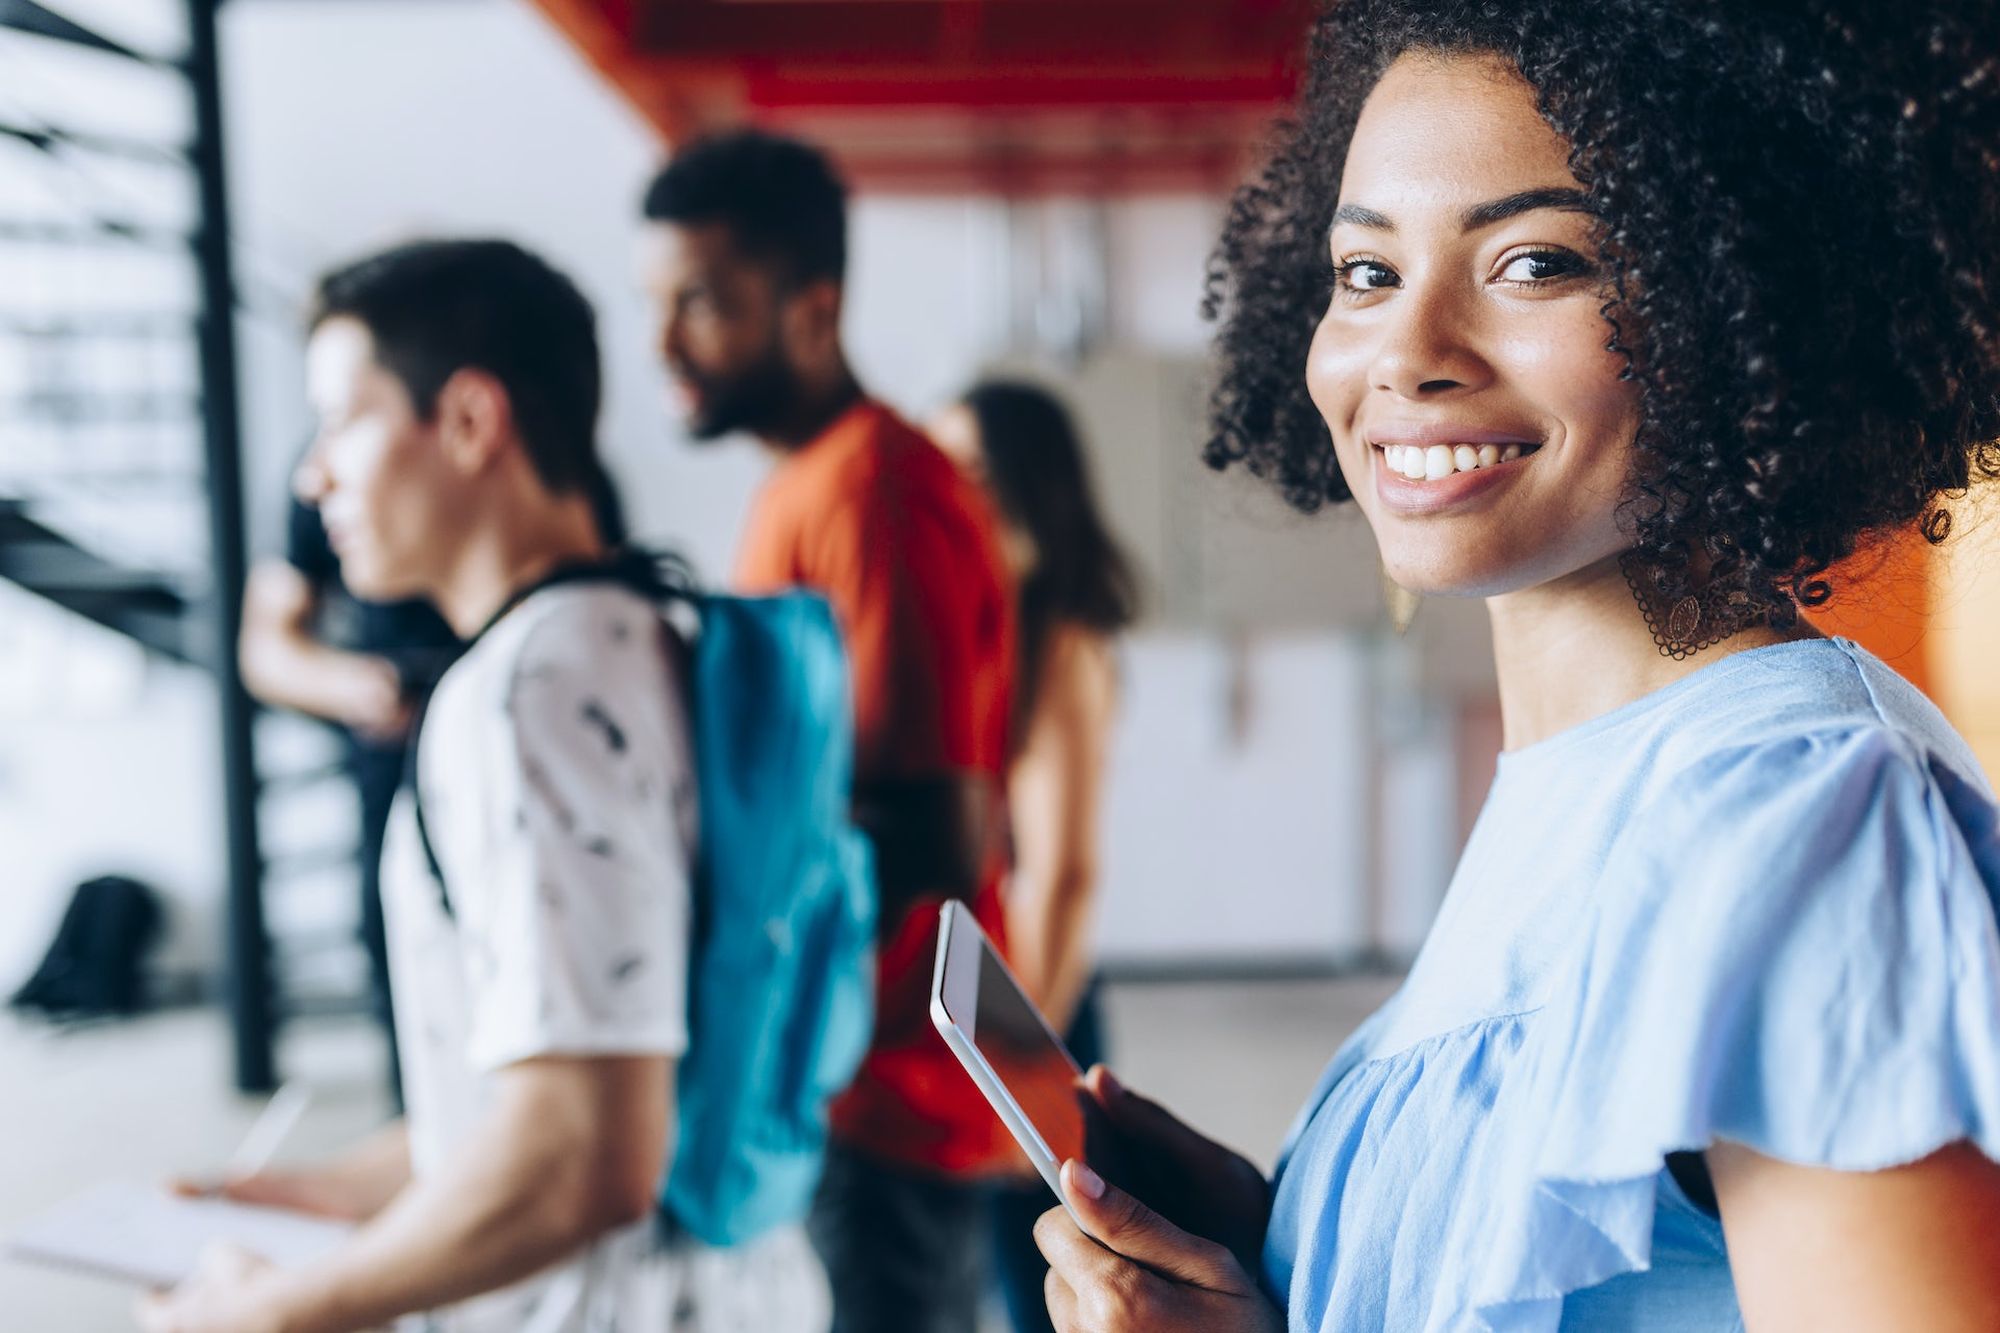 Affirmative action for college students in Brazil led to better employment prospects for those who benefited from the policy. Cesar Okada via Getty Images